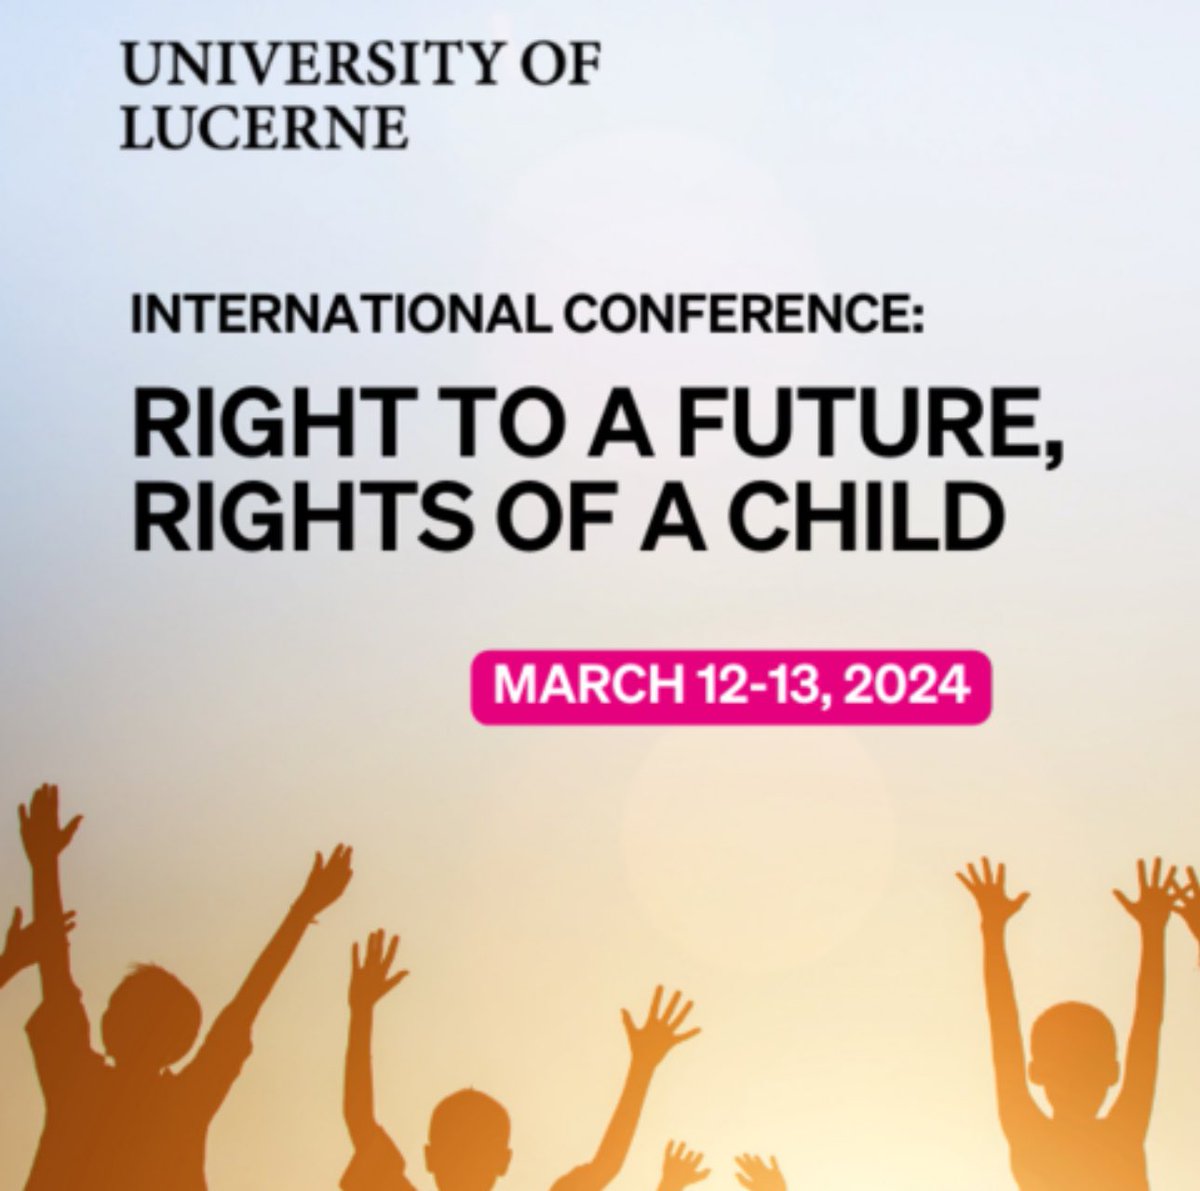 Super jazzed to be giving a keynote at this @UniLuzern conference on children’s rights alongside scholars I admire so much, including @Mary_Anne_Case, Emily Buss, and former President of Ireland, Mary McAaleese